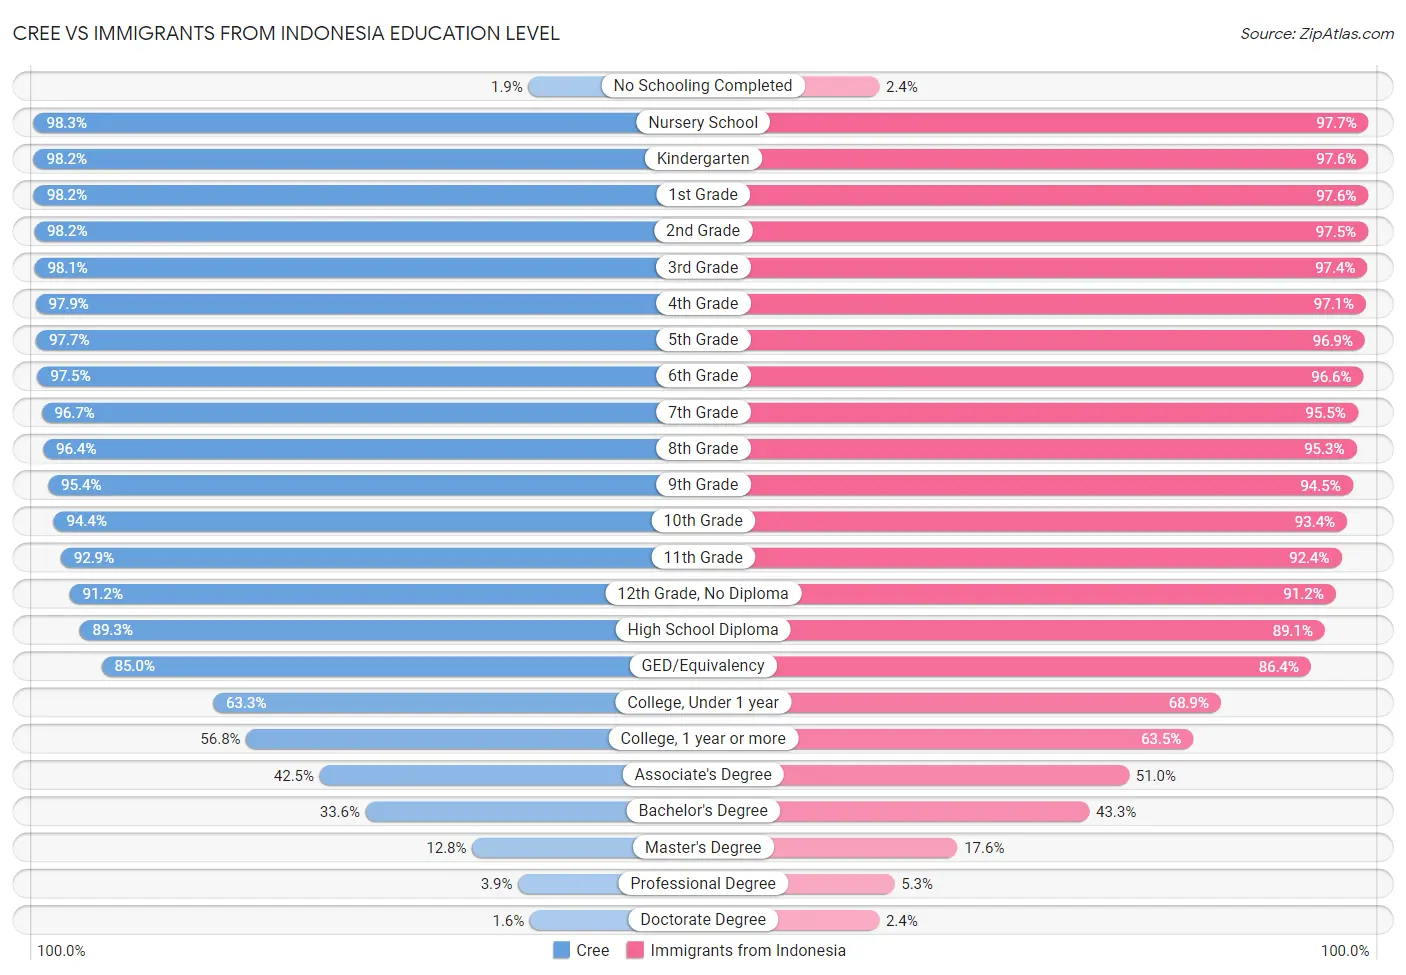 Cree vs Immigrants from Indonesia Education Level